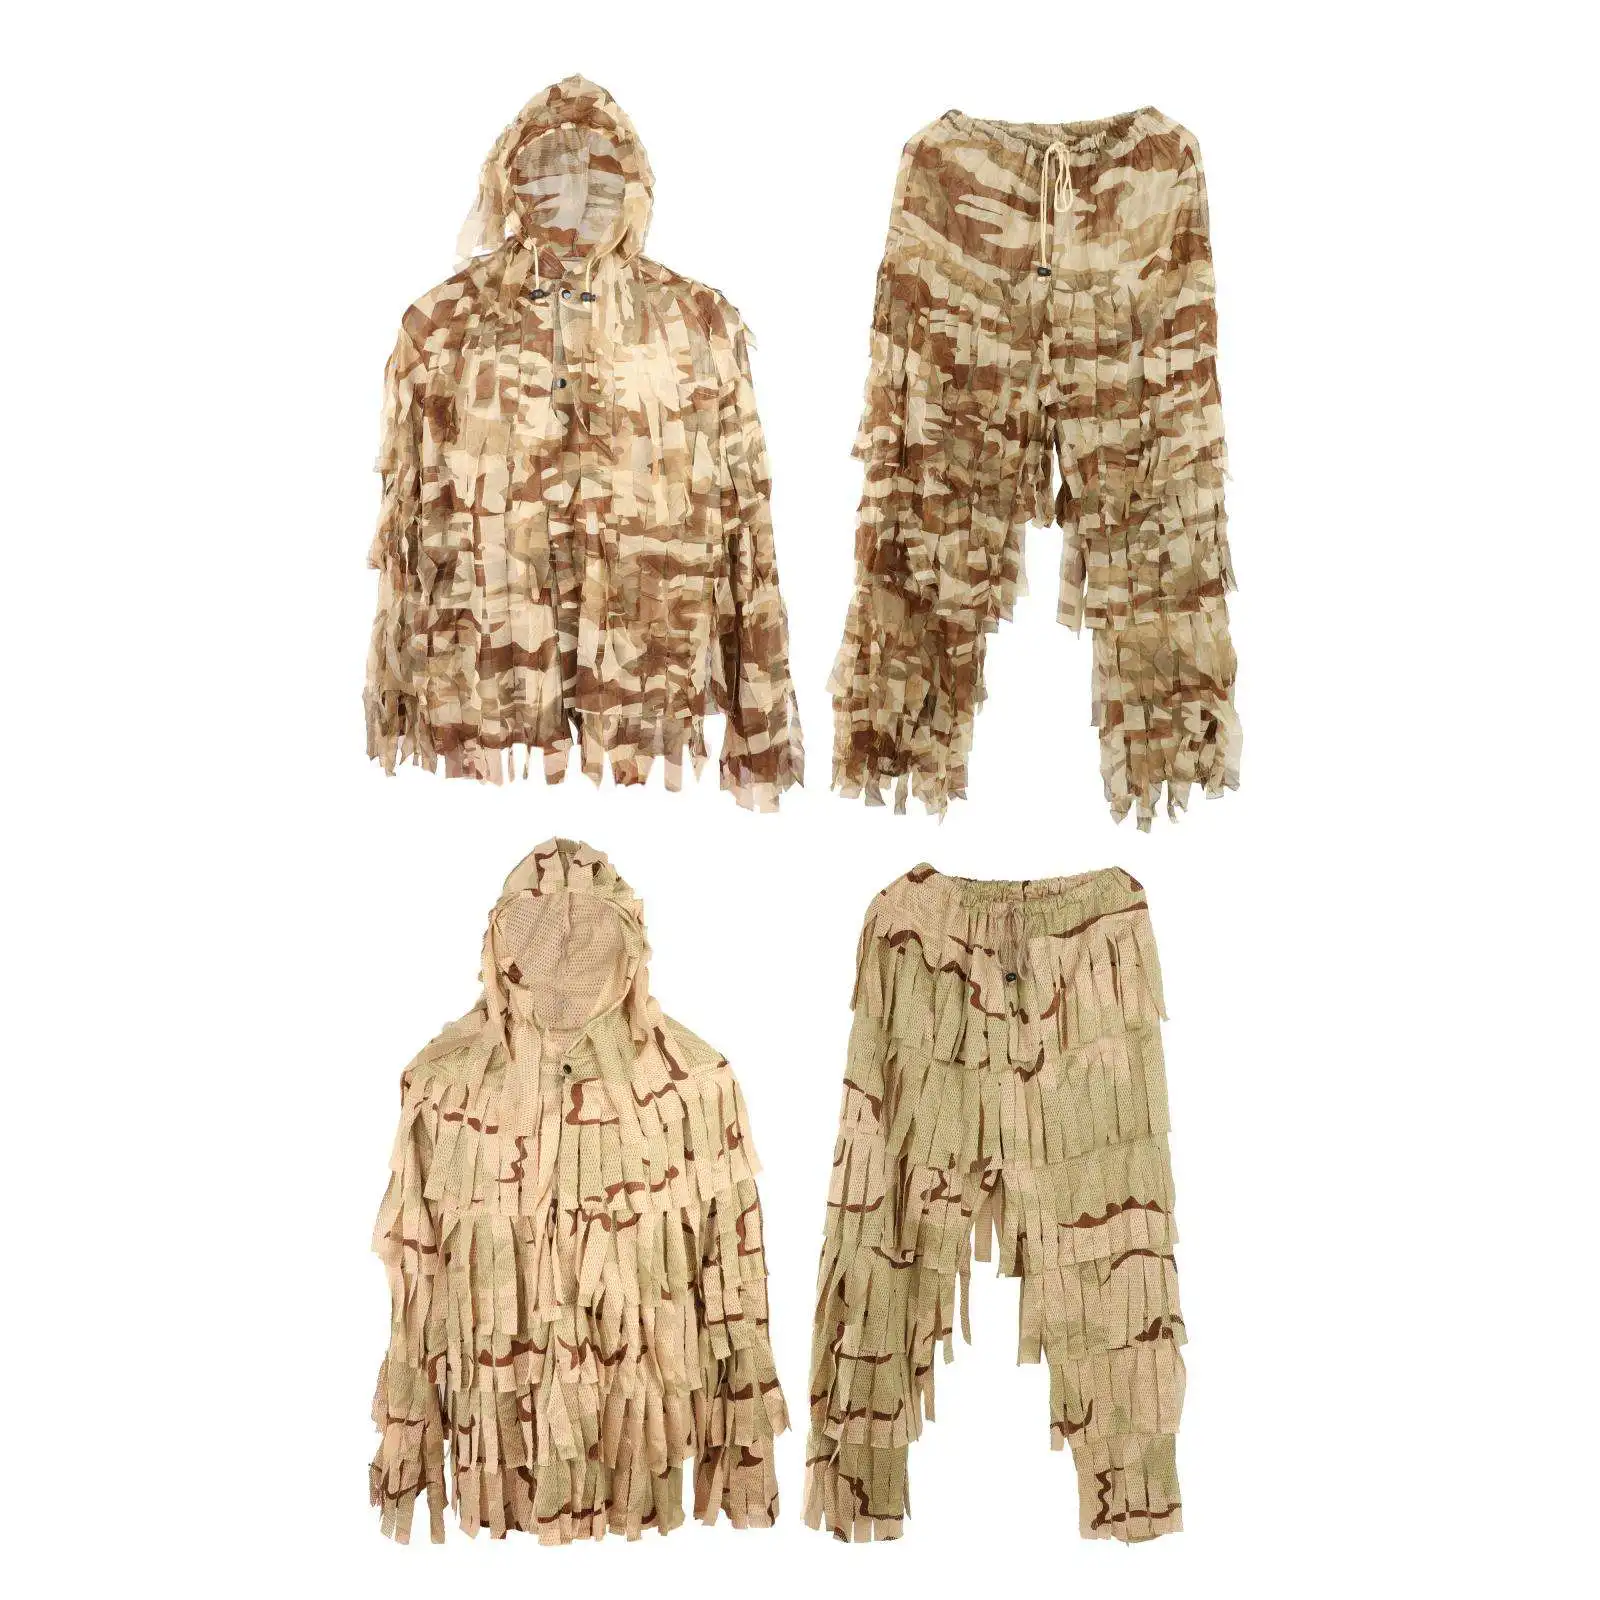 3D Camo Bionic Leaf Camouflage Jungle Hunting Ghillie Suit Set Woodland Sniper Birdwatching Ghillie Suit